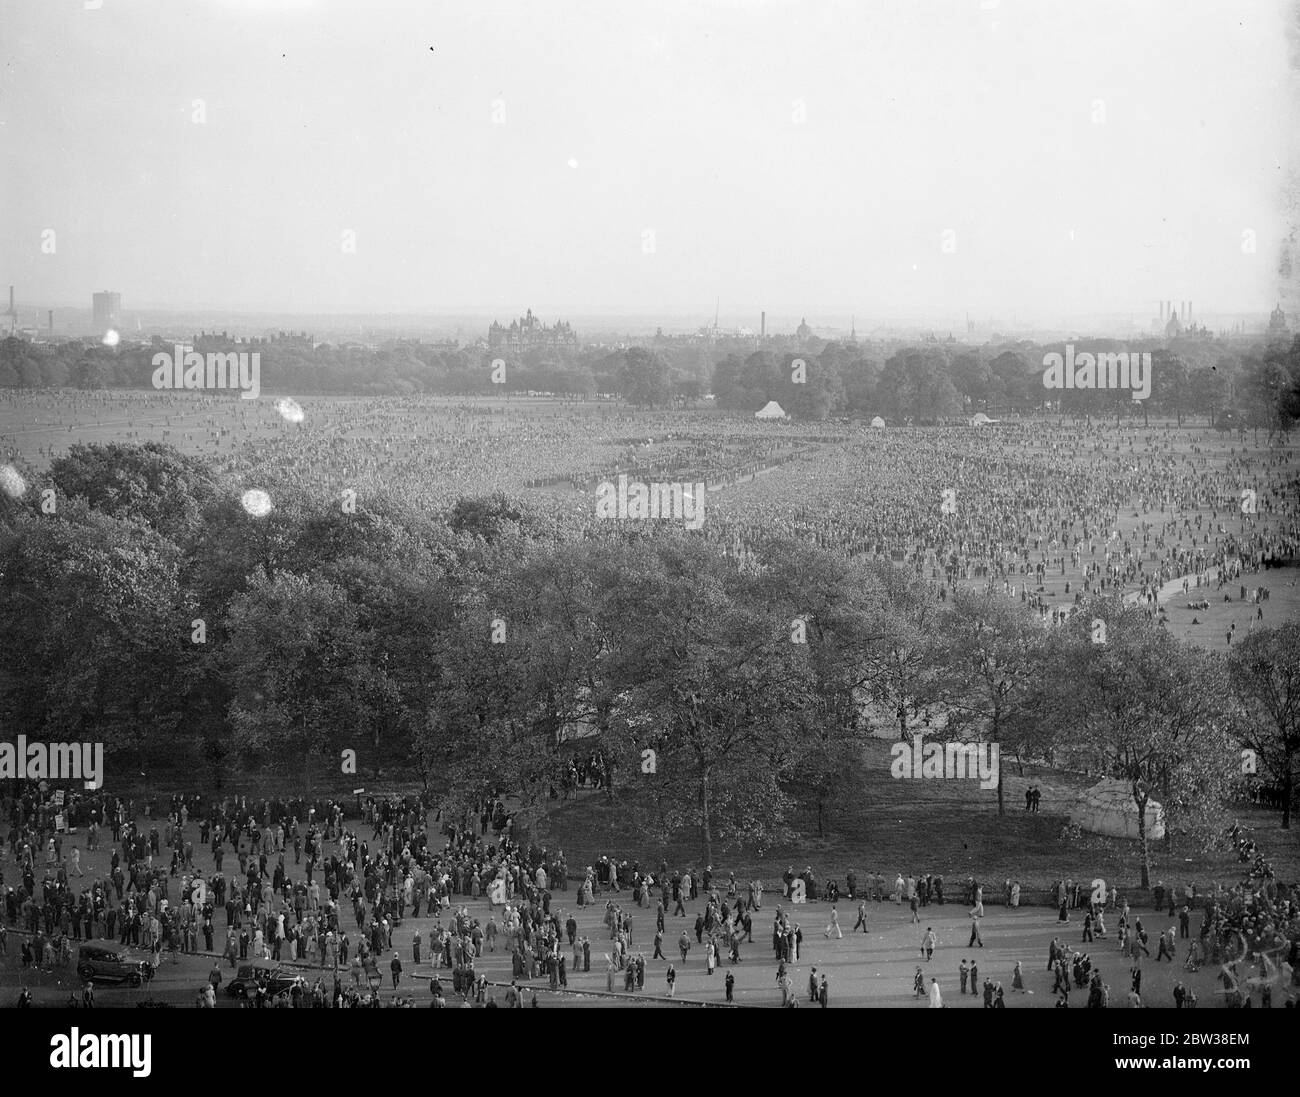 Thousands of Fascists and Anti Fascist held counter demonstrations in Hyde Park , London . There were several clashes and several demonstrators were injured . The police arrested some of the demonstrators . Photo shows , general view of the great mass of people demonstrating in Hyde Park . 9 September 1934 Stock Photo